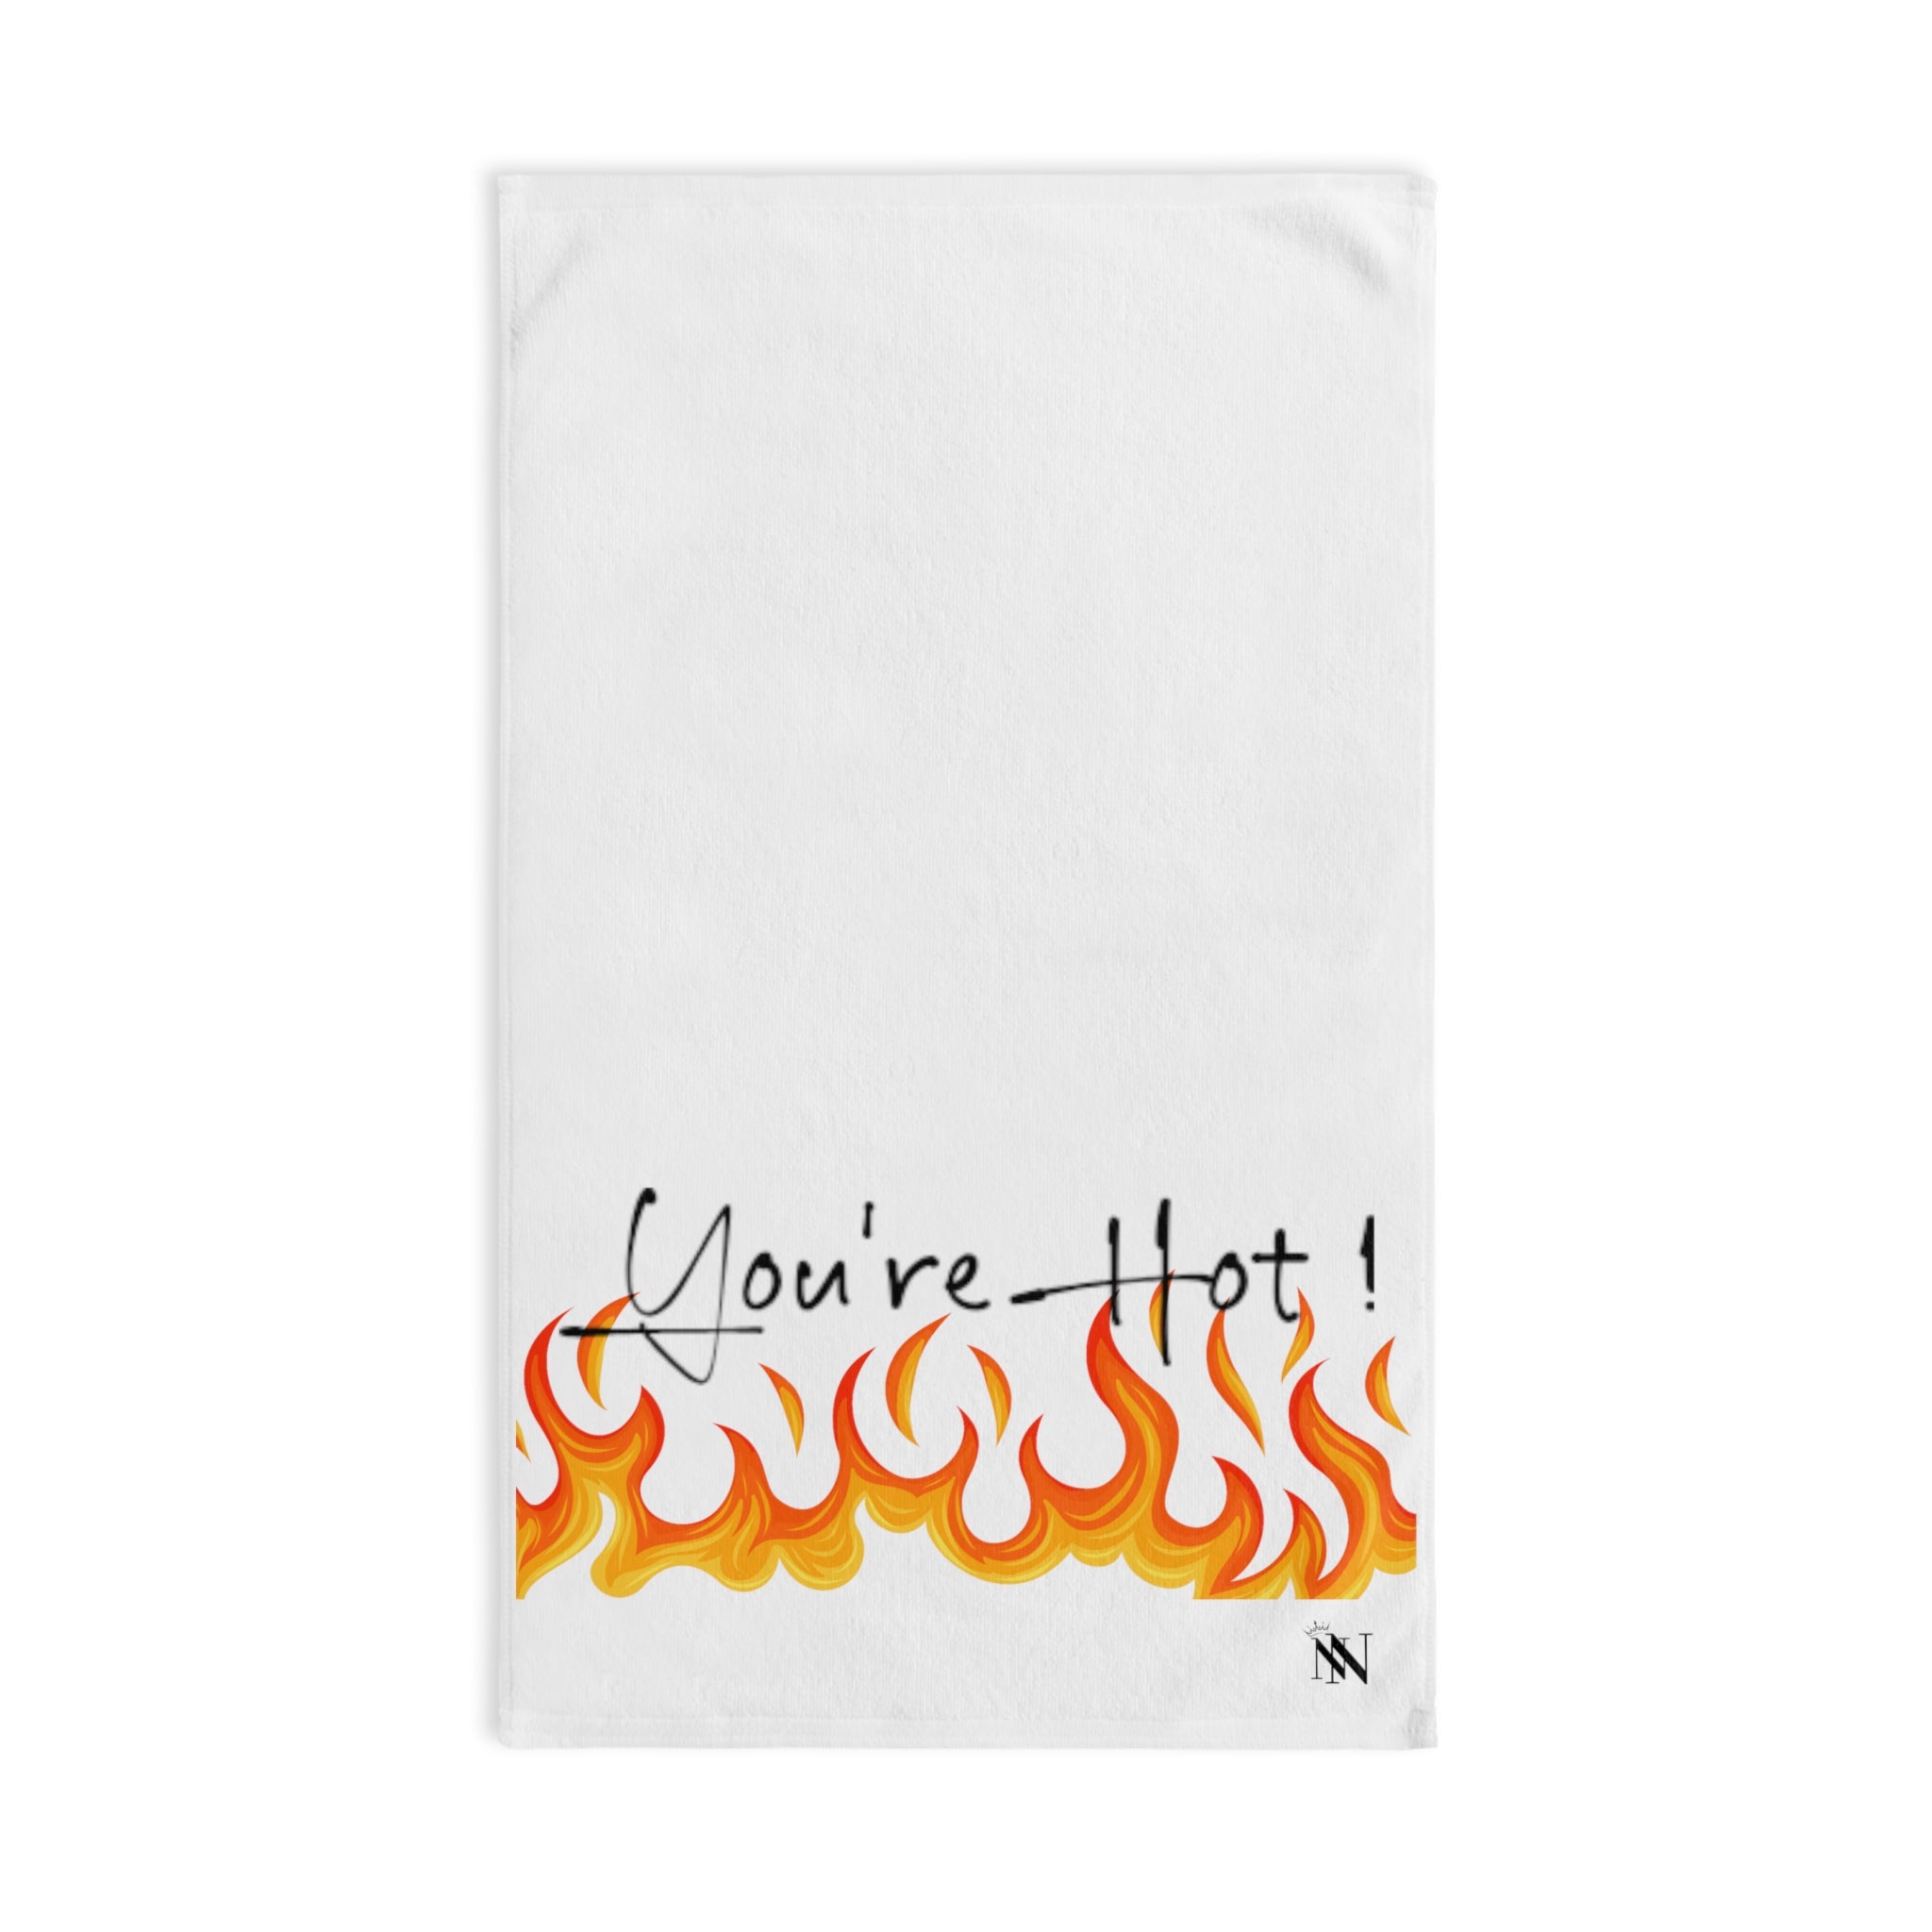 Flame Hot You White | Funny Gifts for Men - Gifts for Him - Birthday Gifts for Men, Him, Her, Husband, Boyfriend, Girlfriend, New Couple Gifts, Fathers & Valentines Day Gifts, Christmas Gifts NECTAR NAPKINS